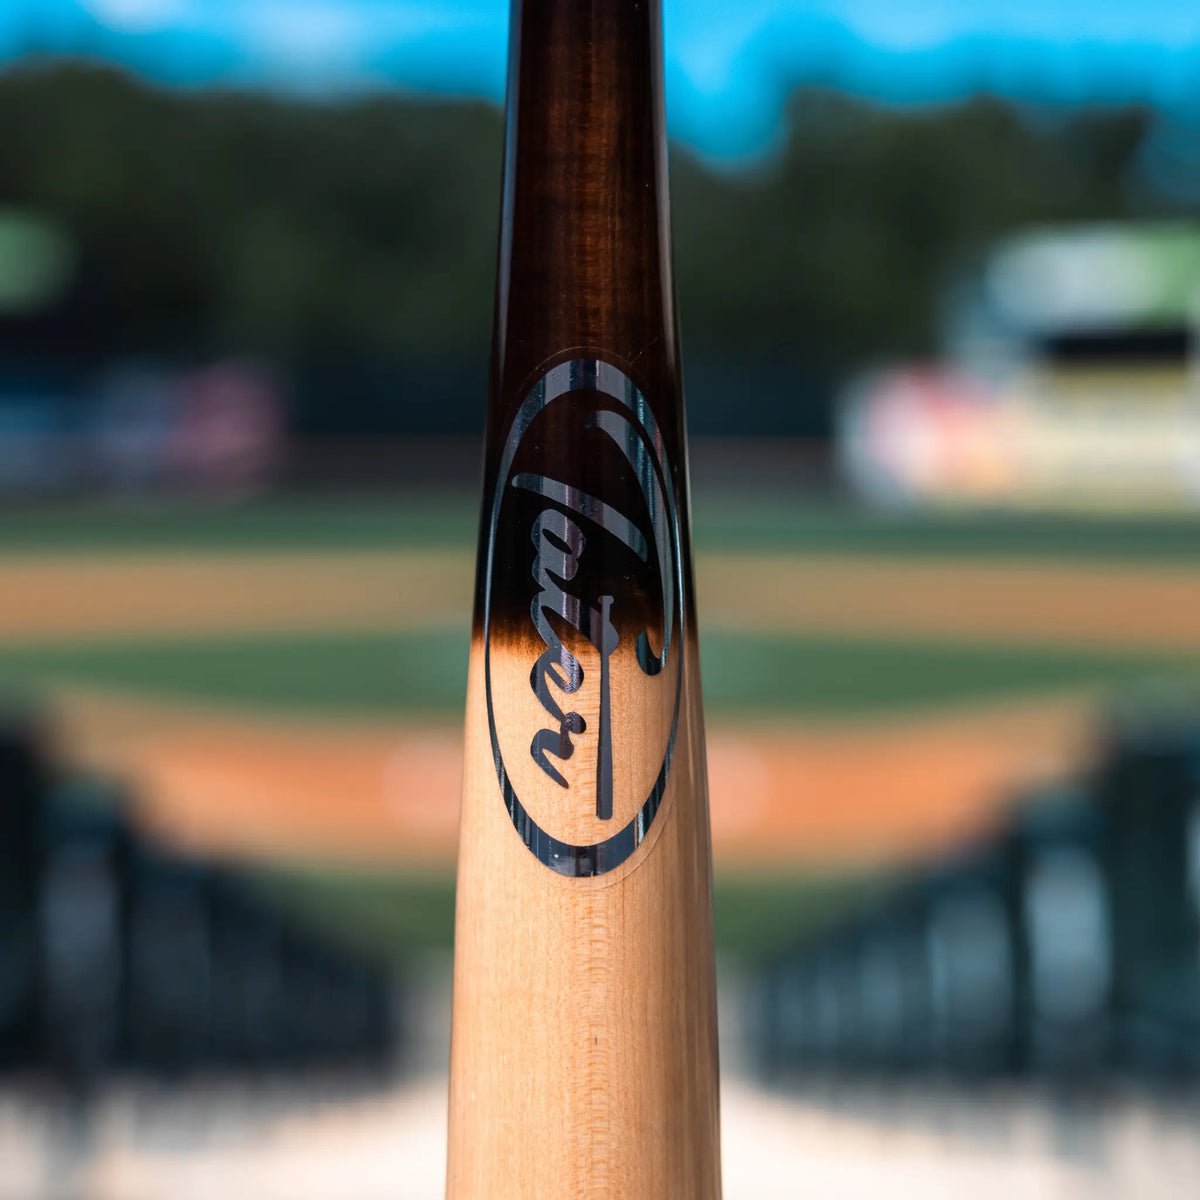 Featured in this image is the middle section of a Tater X12 Pro Maple baseball bat, displaying the elegant sliver Tater logo on its polished wood surface. The bat is centered against a softly focused baseball diamond, capturing the essence of the game.